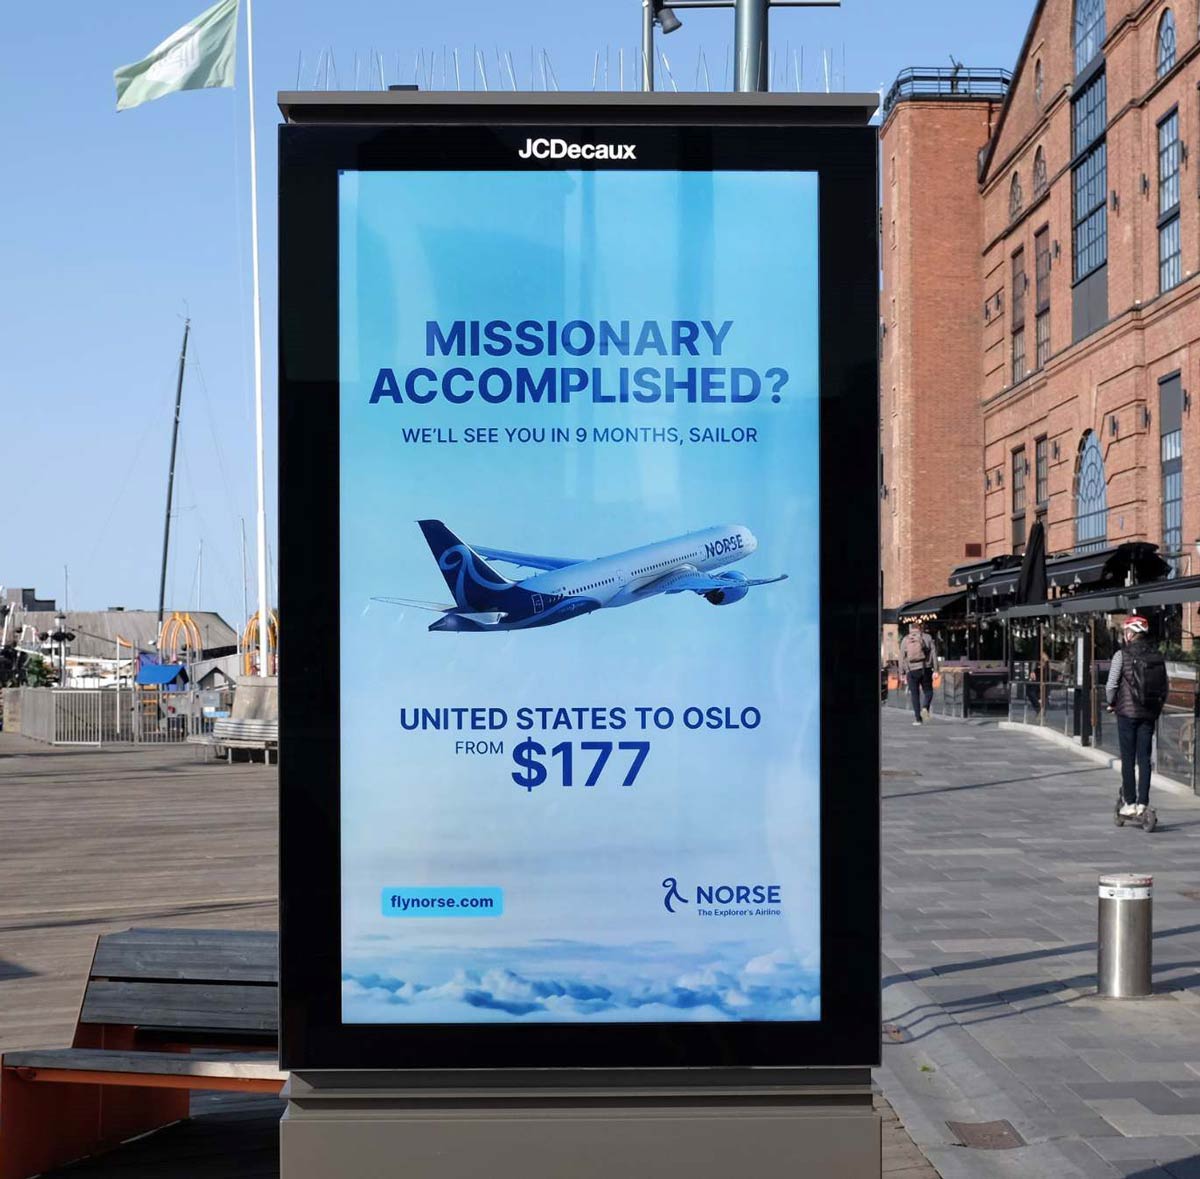 This ad popped up in Oslo, Norway, where over 4,000 American sailors from the USS Gerald R. Ford are set to enjoy their shore leave this weekend